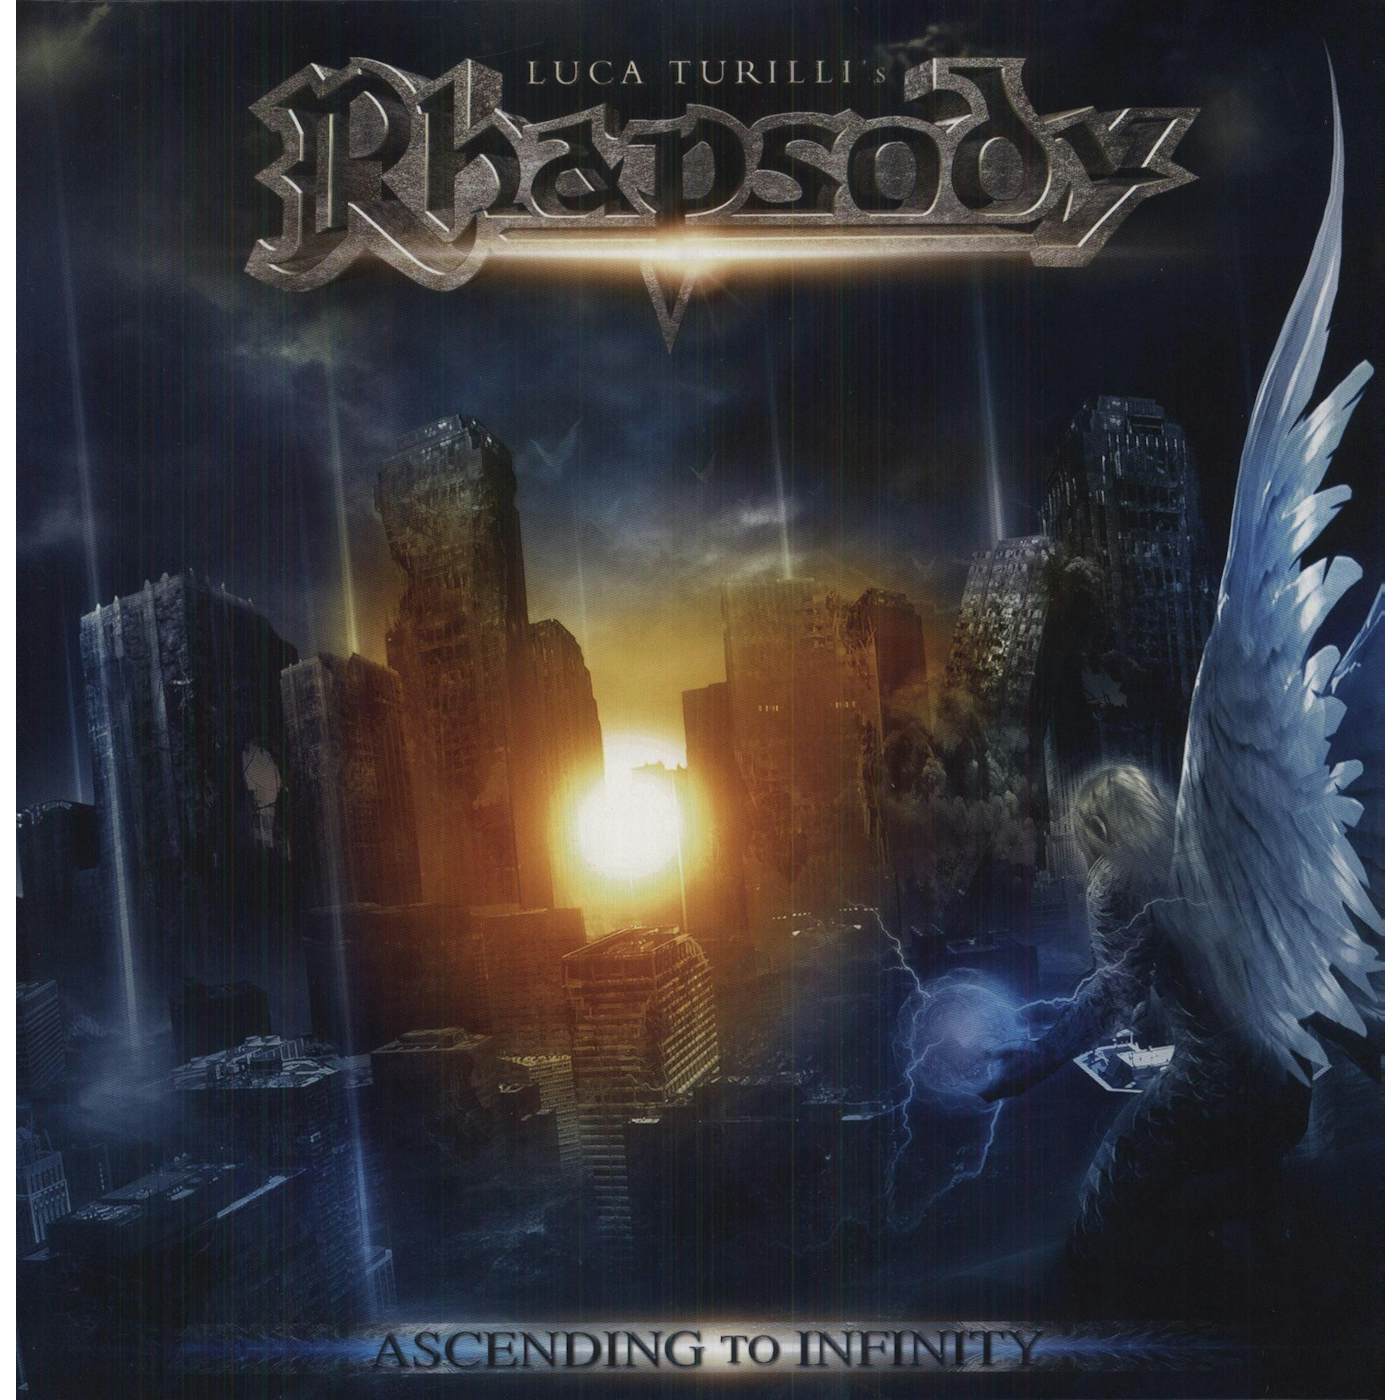 Luca Turilli's Rhapsody ASCENDING TO INFINITY Vinyl Record - Holland Release